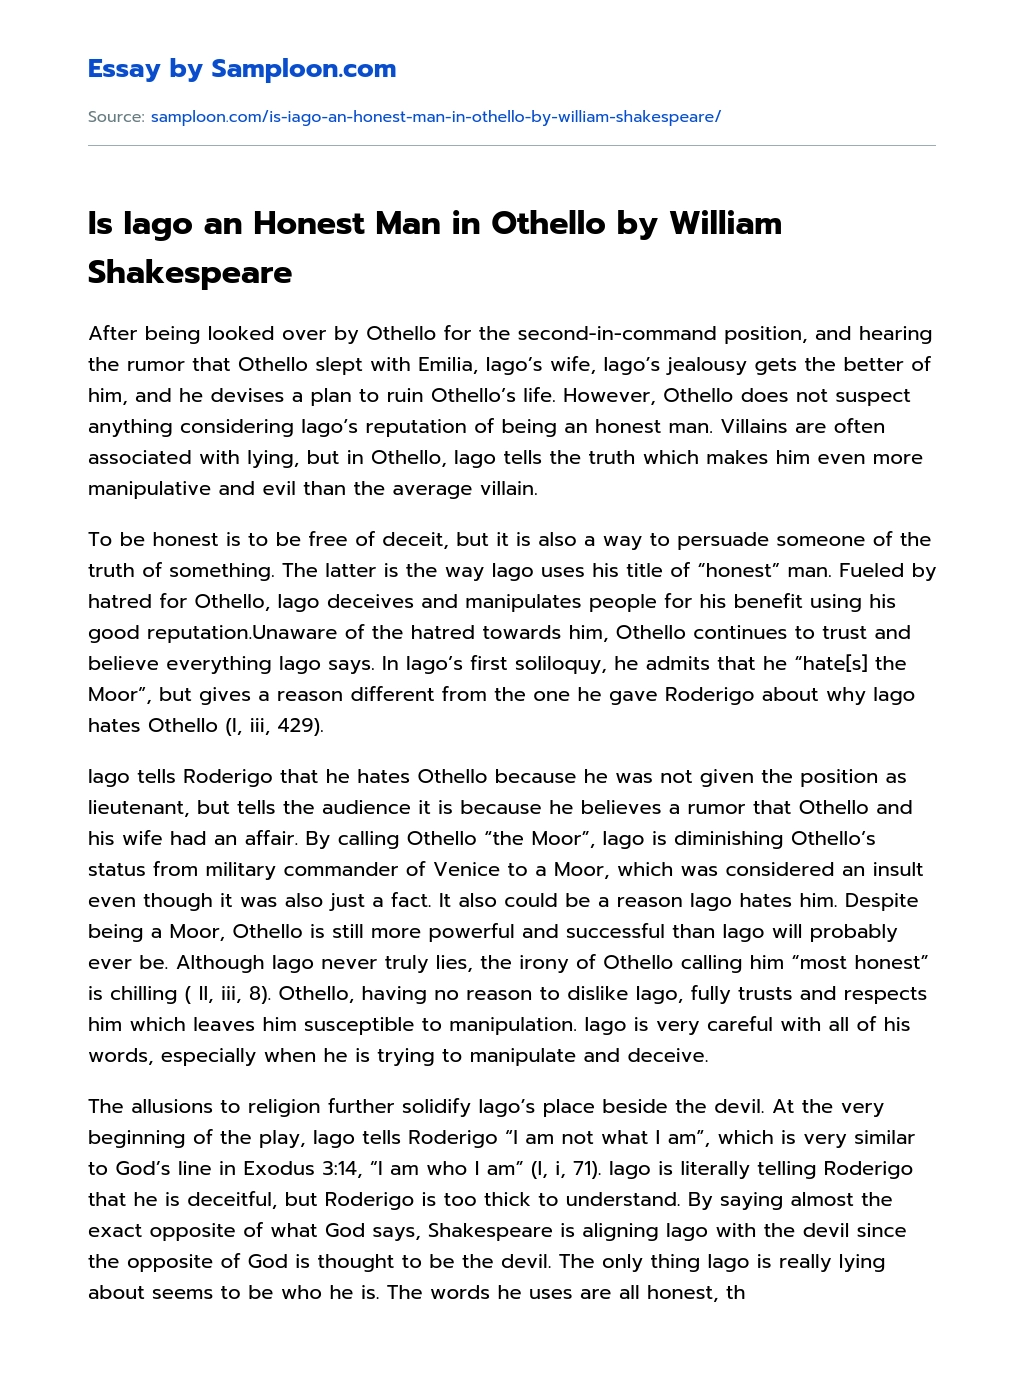 Is Iago an Honest Man in Othello by William Shakespeare essay